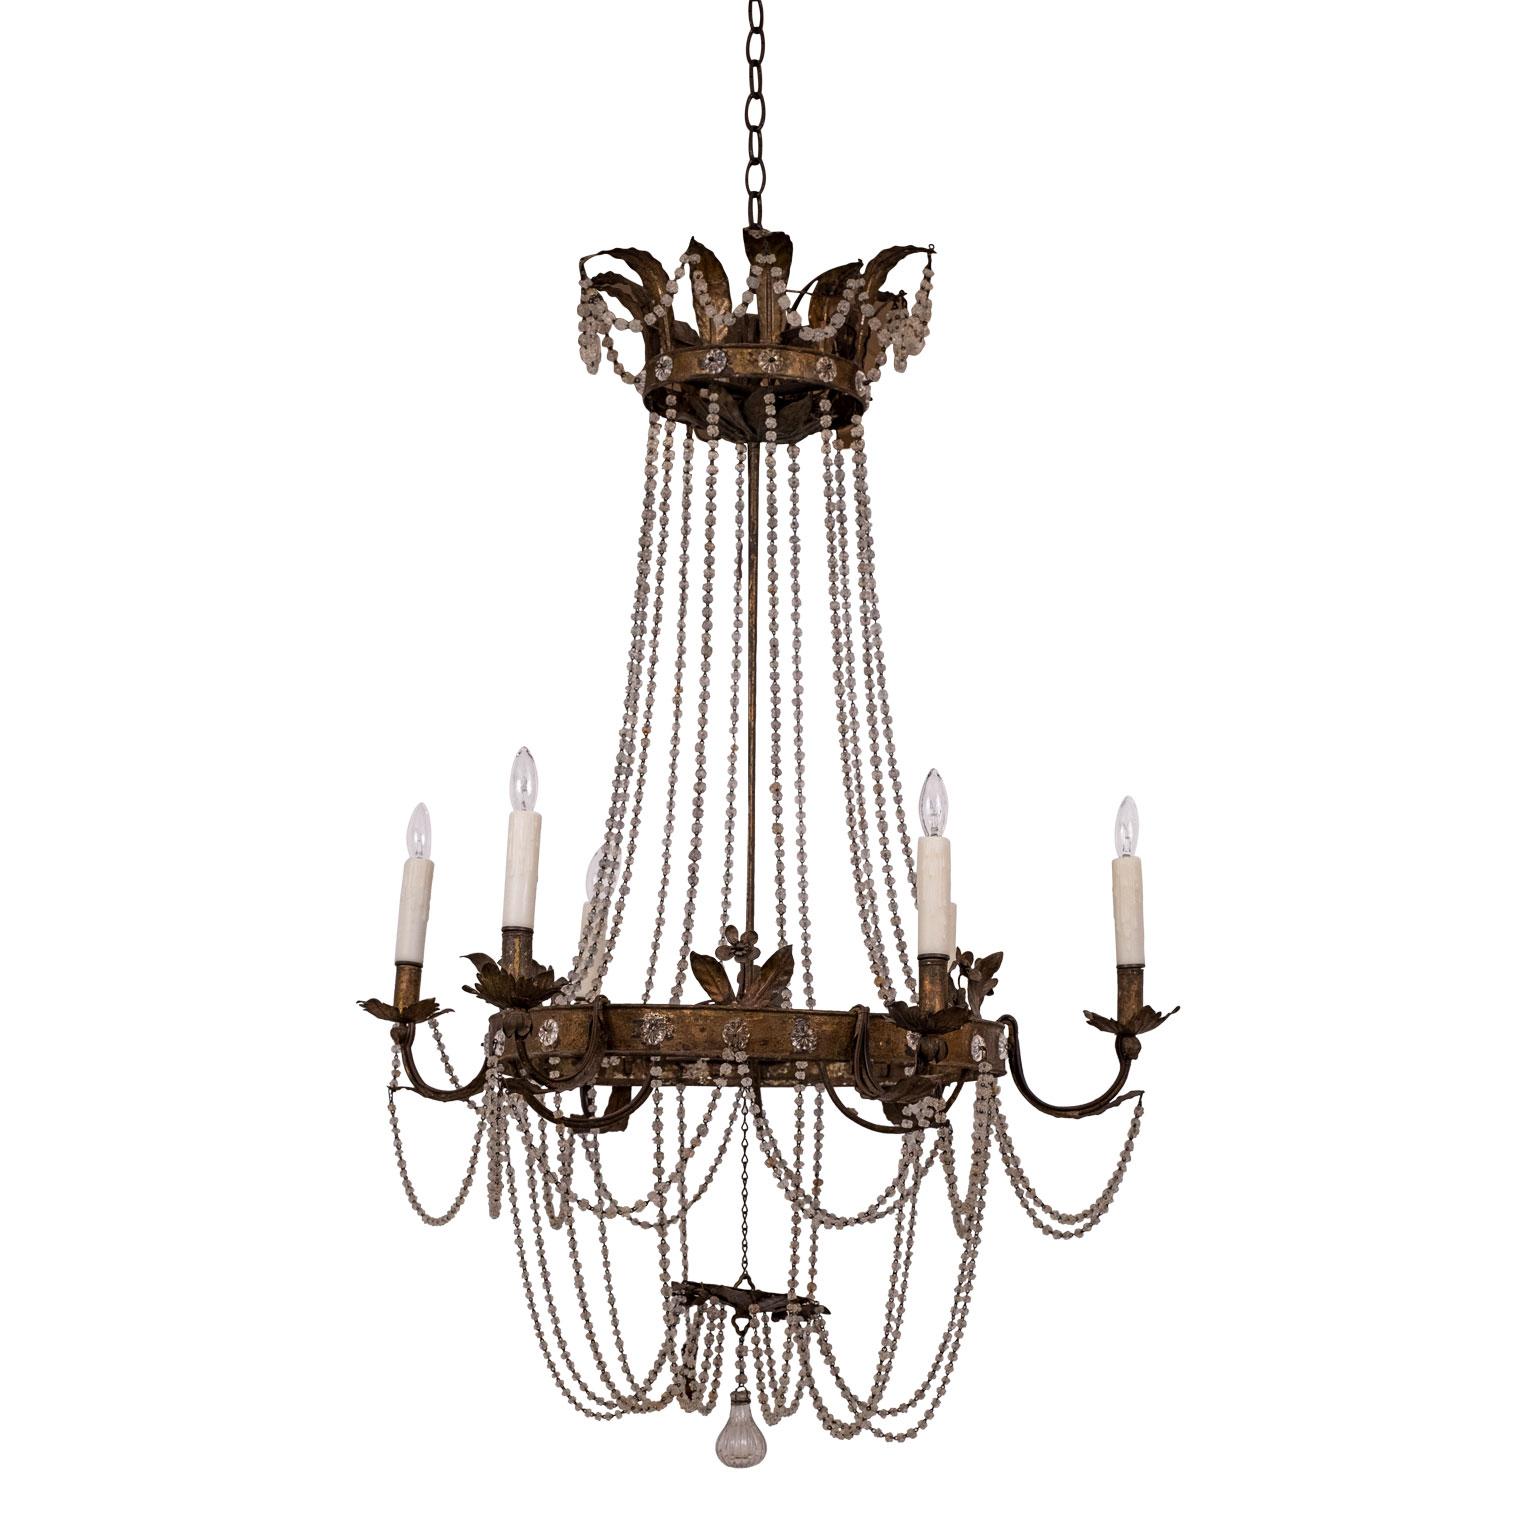 Mid-19th Century Gilt Tole and Glass French Empire Chandelier